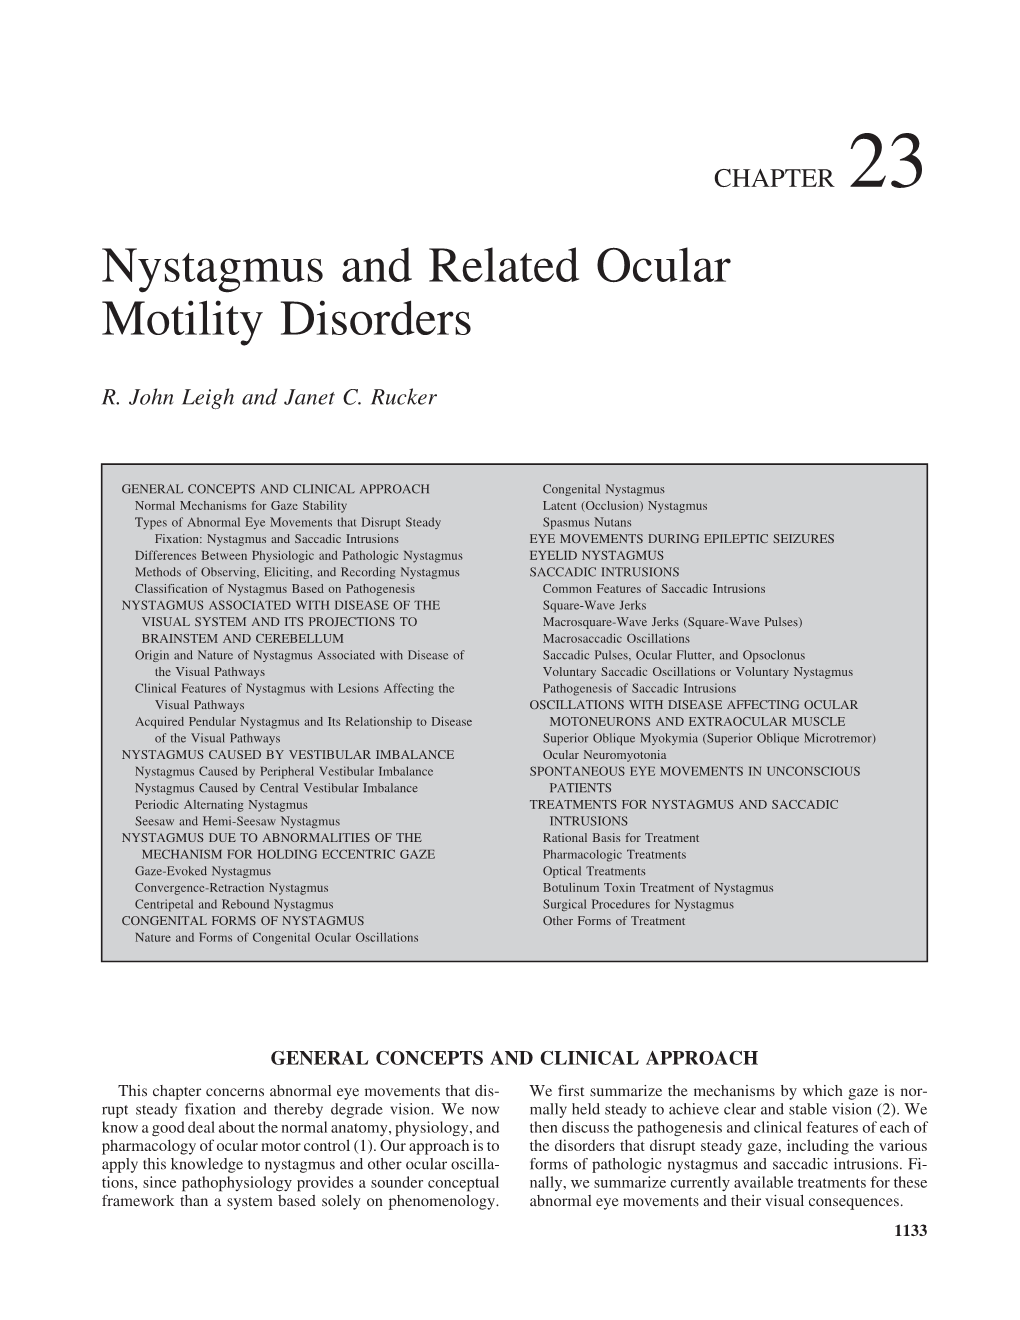 Nystagmus and Related Ocular Motility Disorders